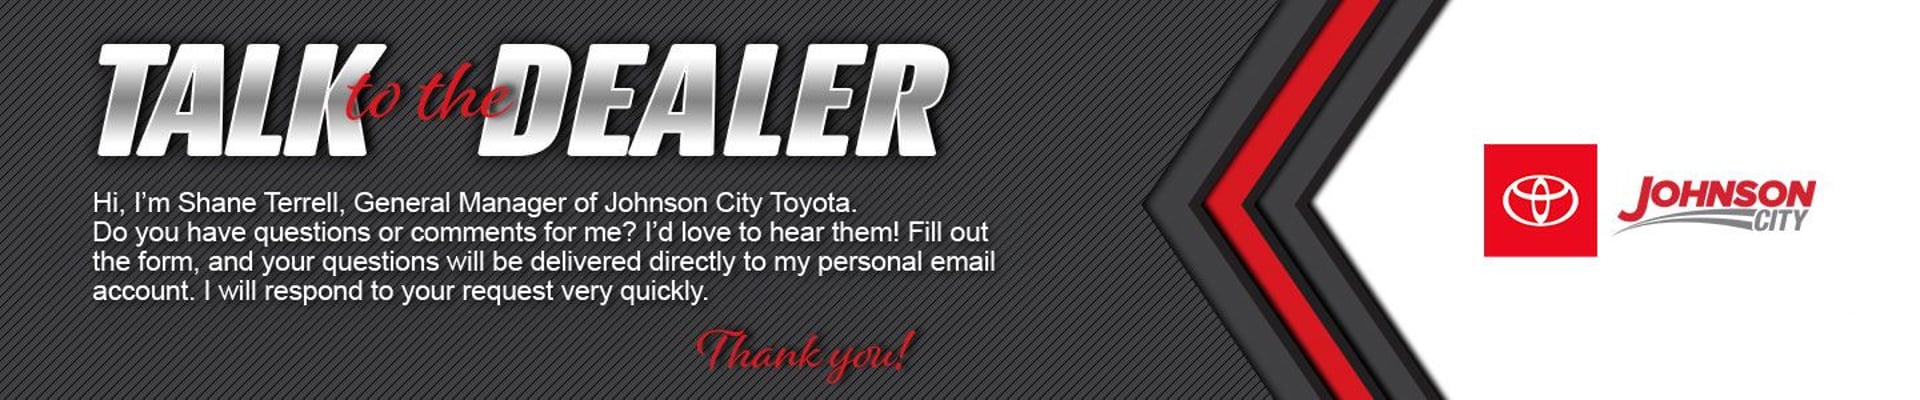 TALKorth DEALER Hi, I'm Shane Terrell, General Manager of Johnson City Toyota. Do you have questions or comments for me? I'd love to hear them! Fill out the form, and your questions will be delivered directly to my personal email account. I will respond to your request very quickly. Thank you! JOHNSON CITY